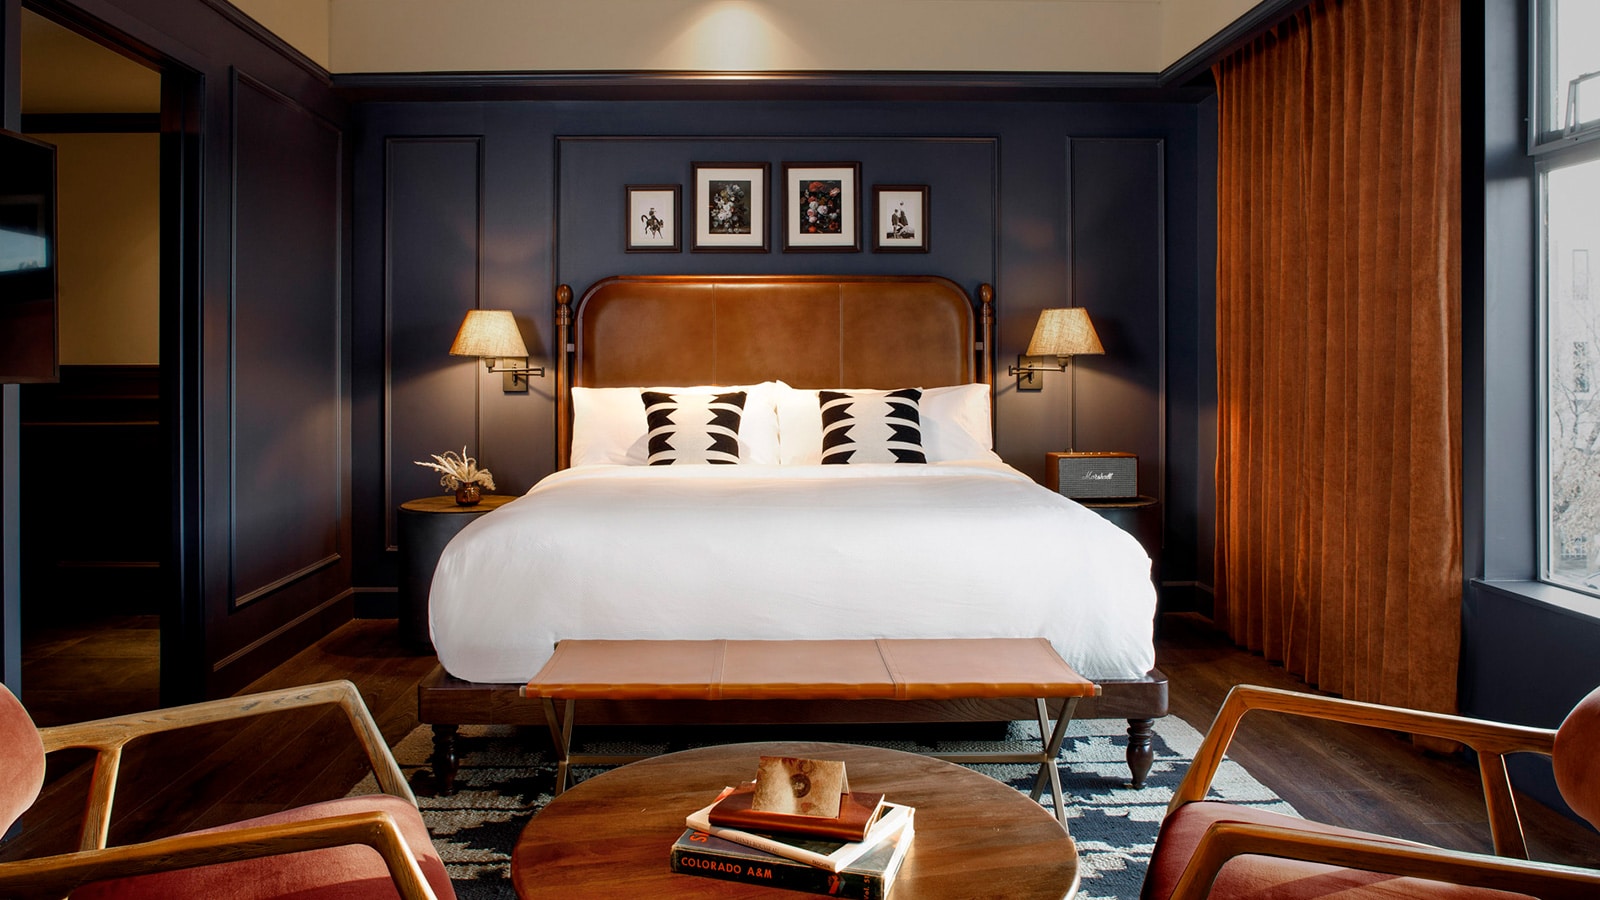 Lower Highlands: a Denver boutique hotel with industrial and Victorian accents